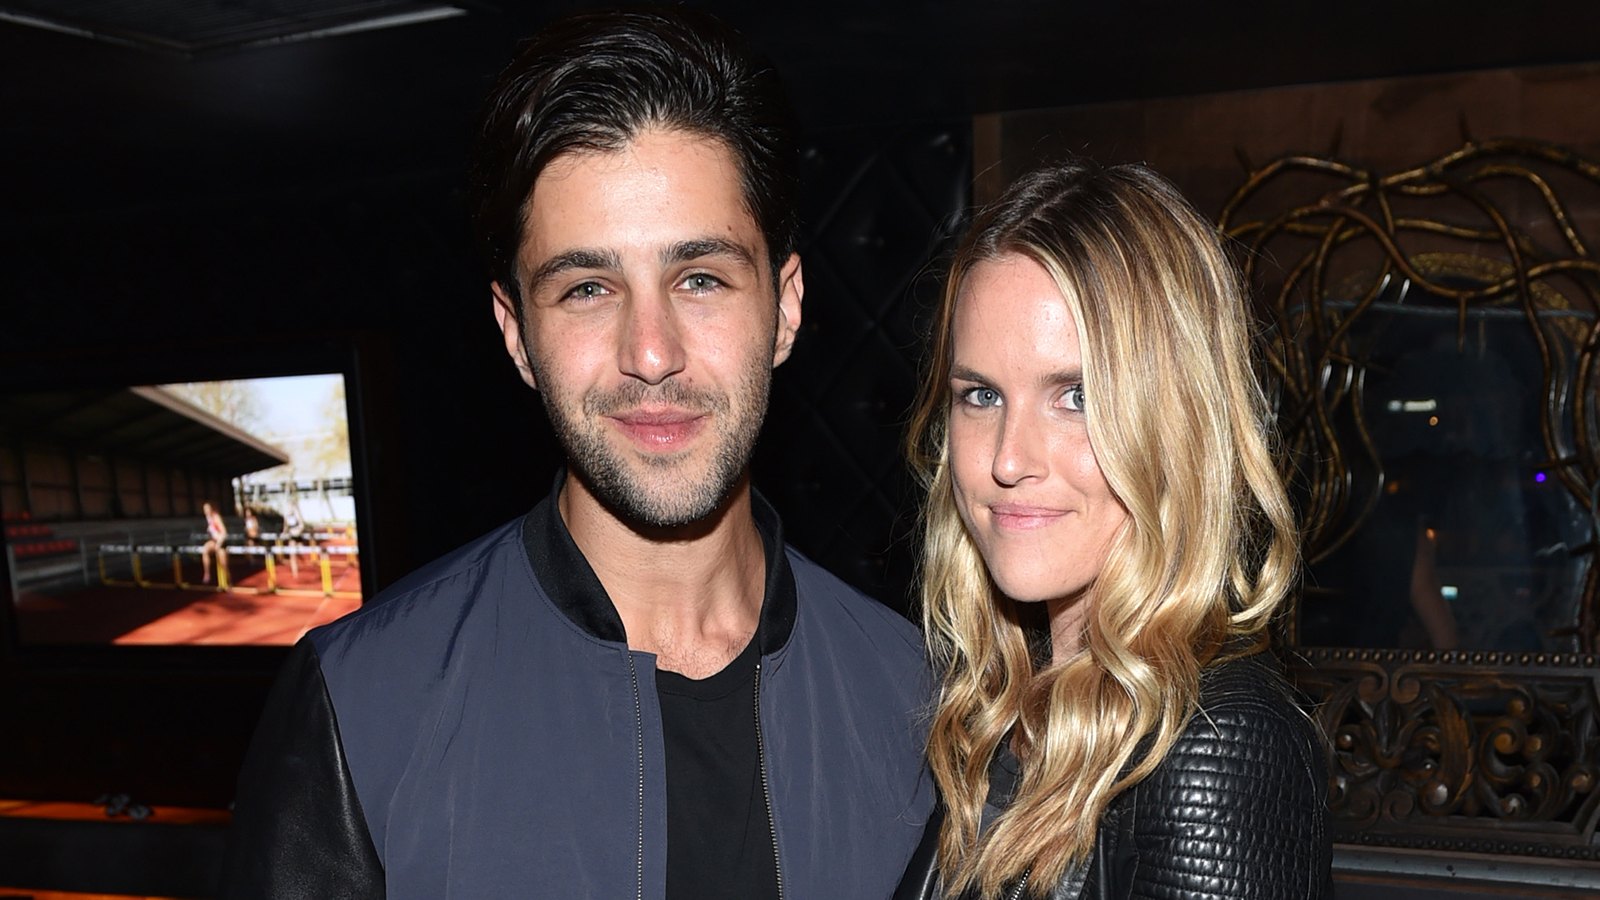 Josh Peck and Wife Paige O'Brien Are Expecting Baby No. 2: See Pregnancy Announcement